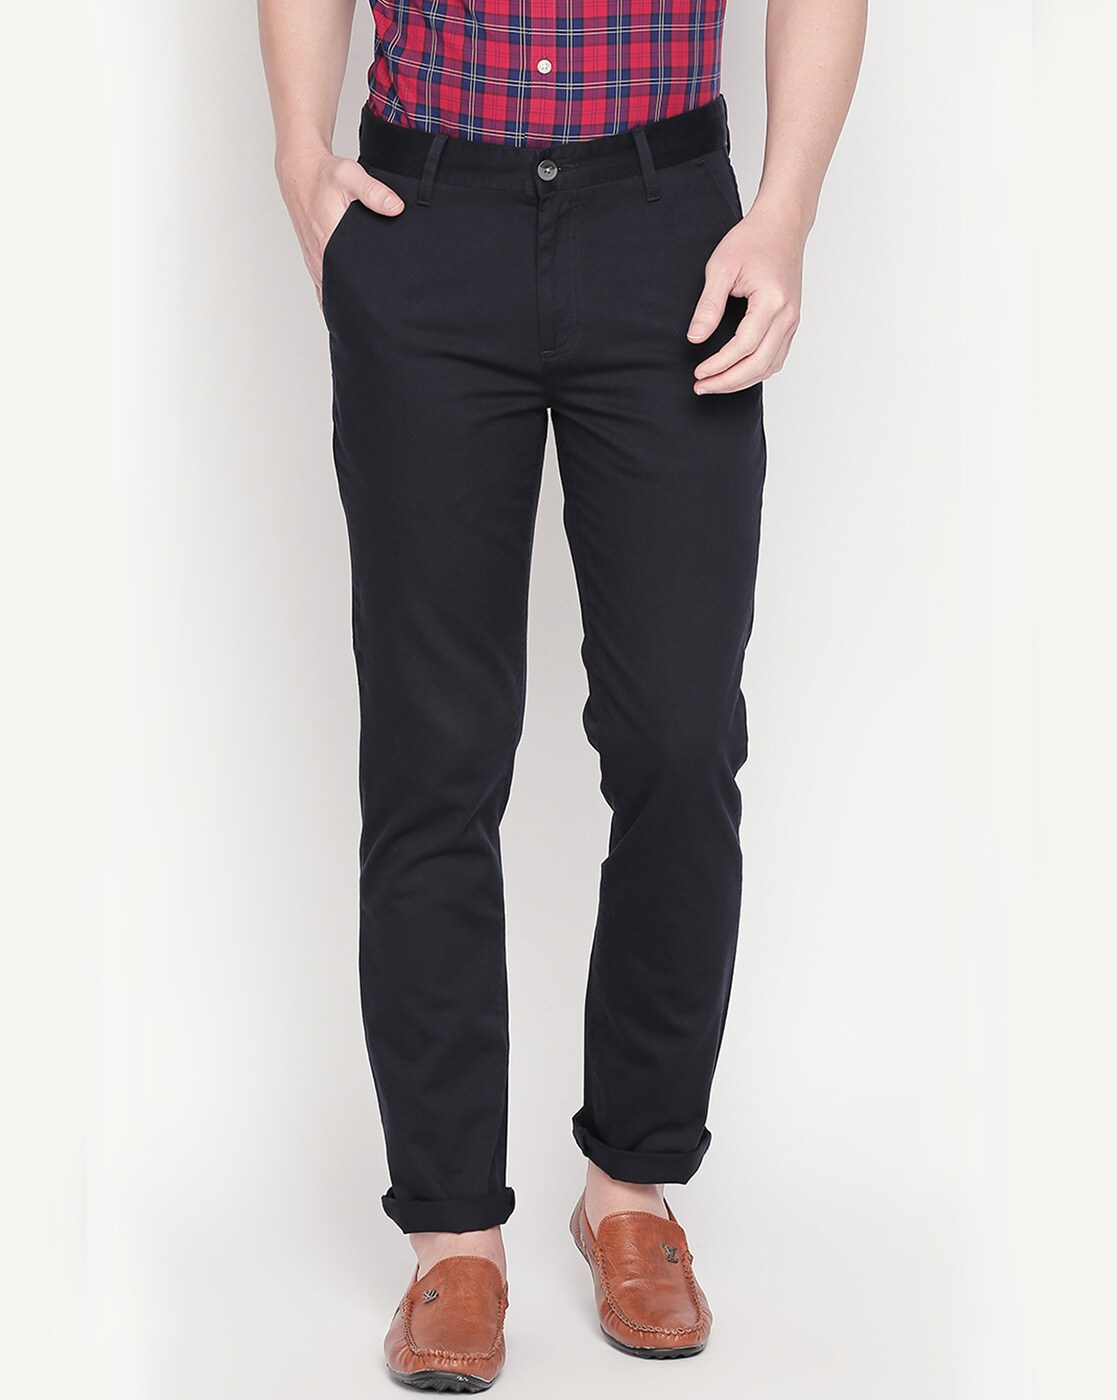 Buy DARK TEAL Trousers & Pants for Men by Byford by Pantaloons Online